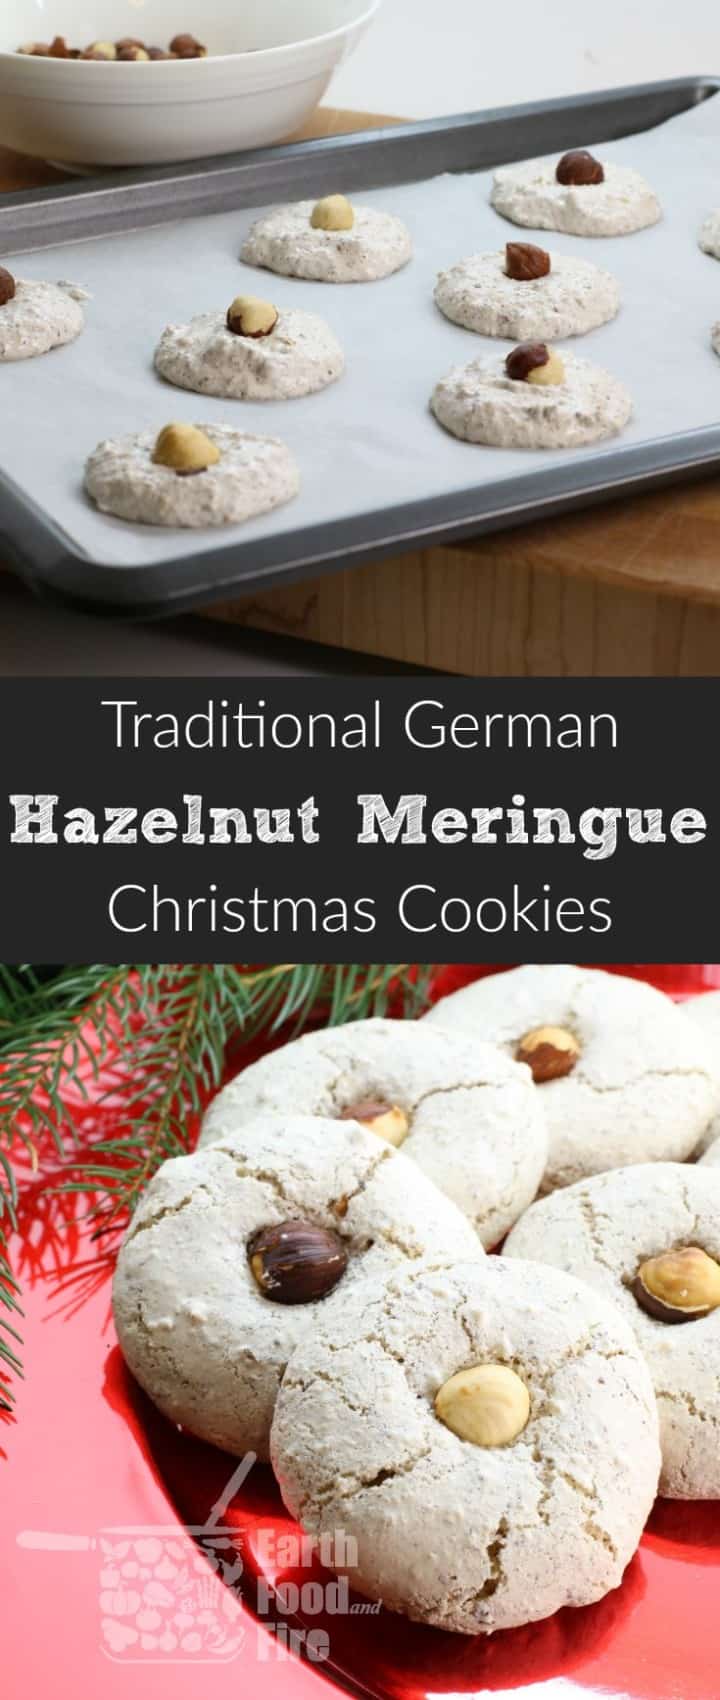 These German Hazelnut Meringue Cookies are light and oh so delicious! Perfect for the holidays and they only take half an hour to make! #hazelnut #cookies #christmas #baking #germancookies